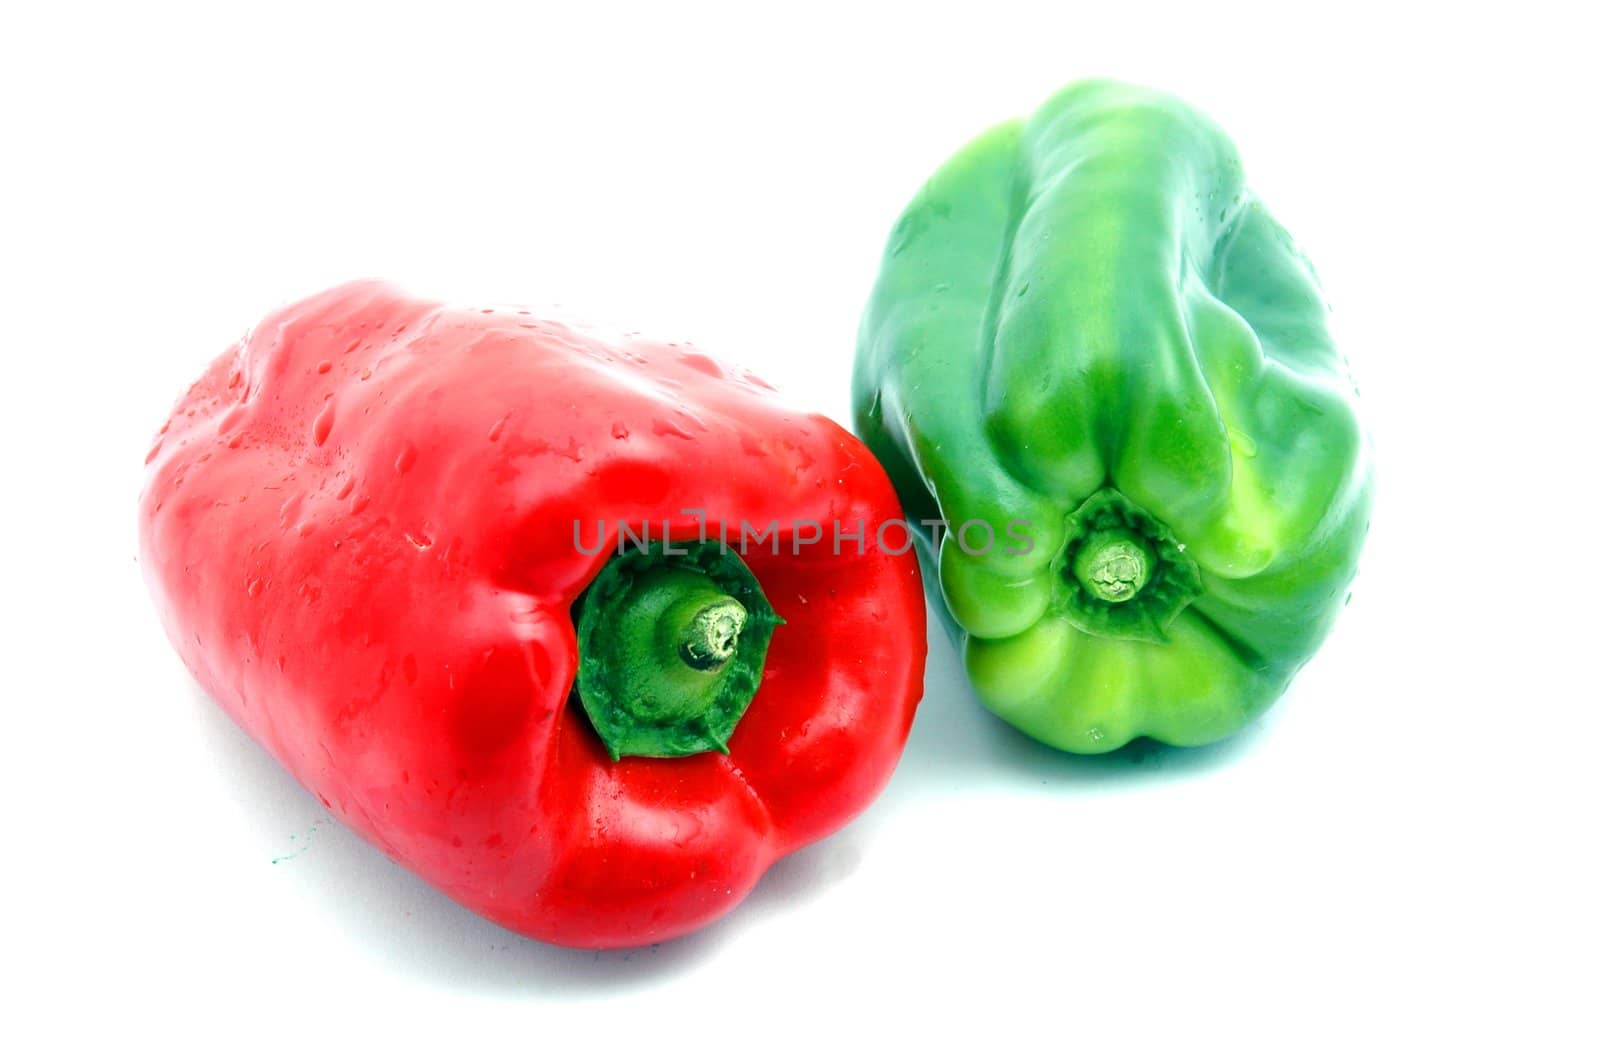 green and red peppers by raalves